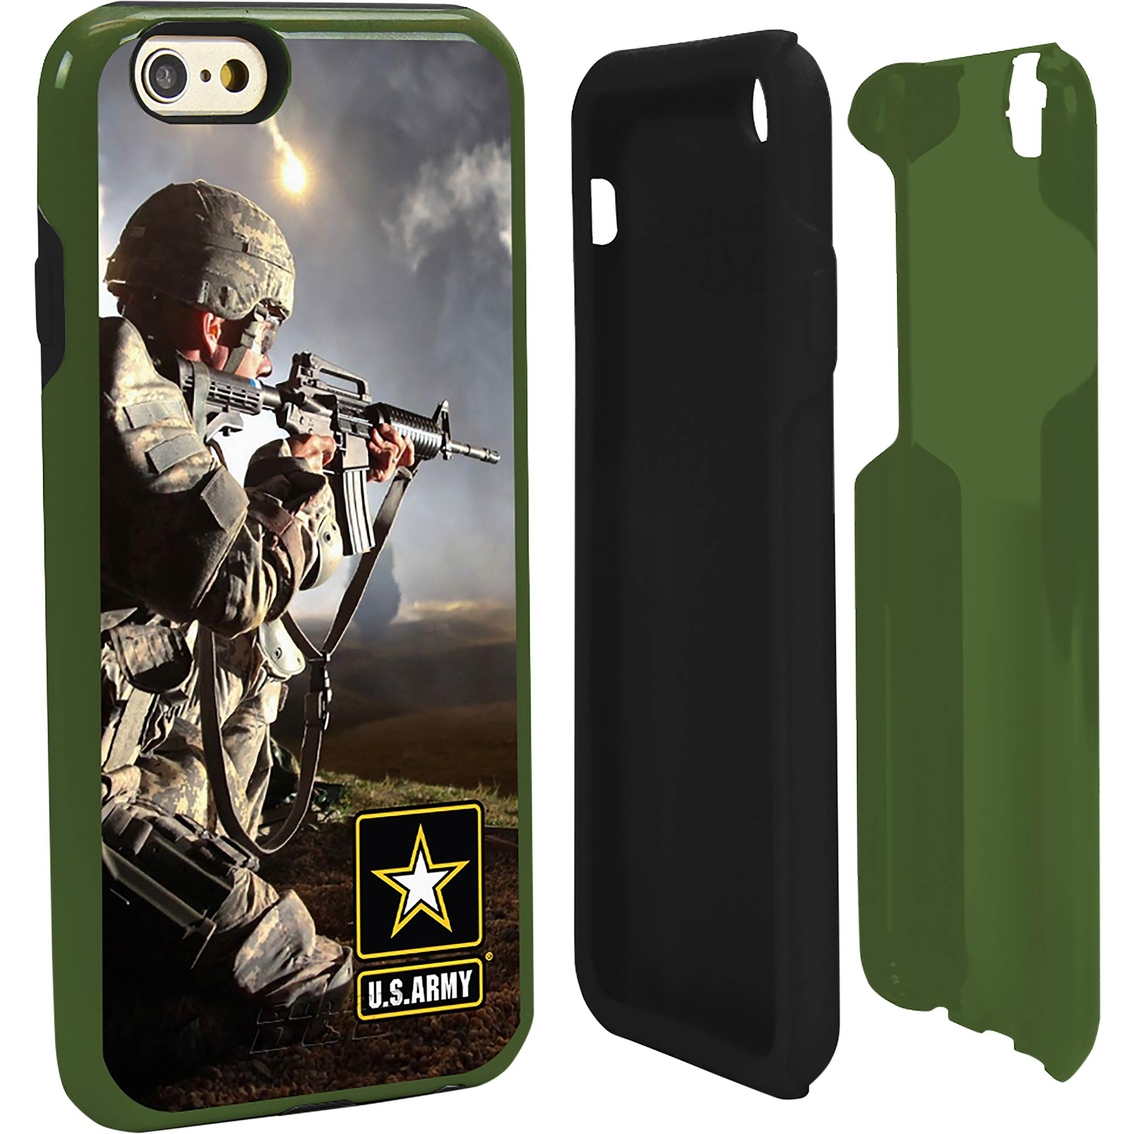 Guard Dog US Army Full Print Hybrid Case for iPhone 6 with Guard Glass Green/Black